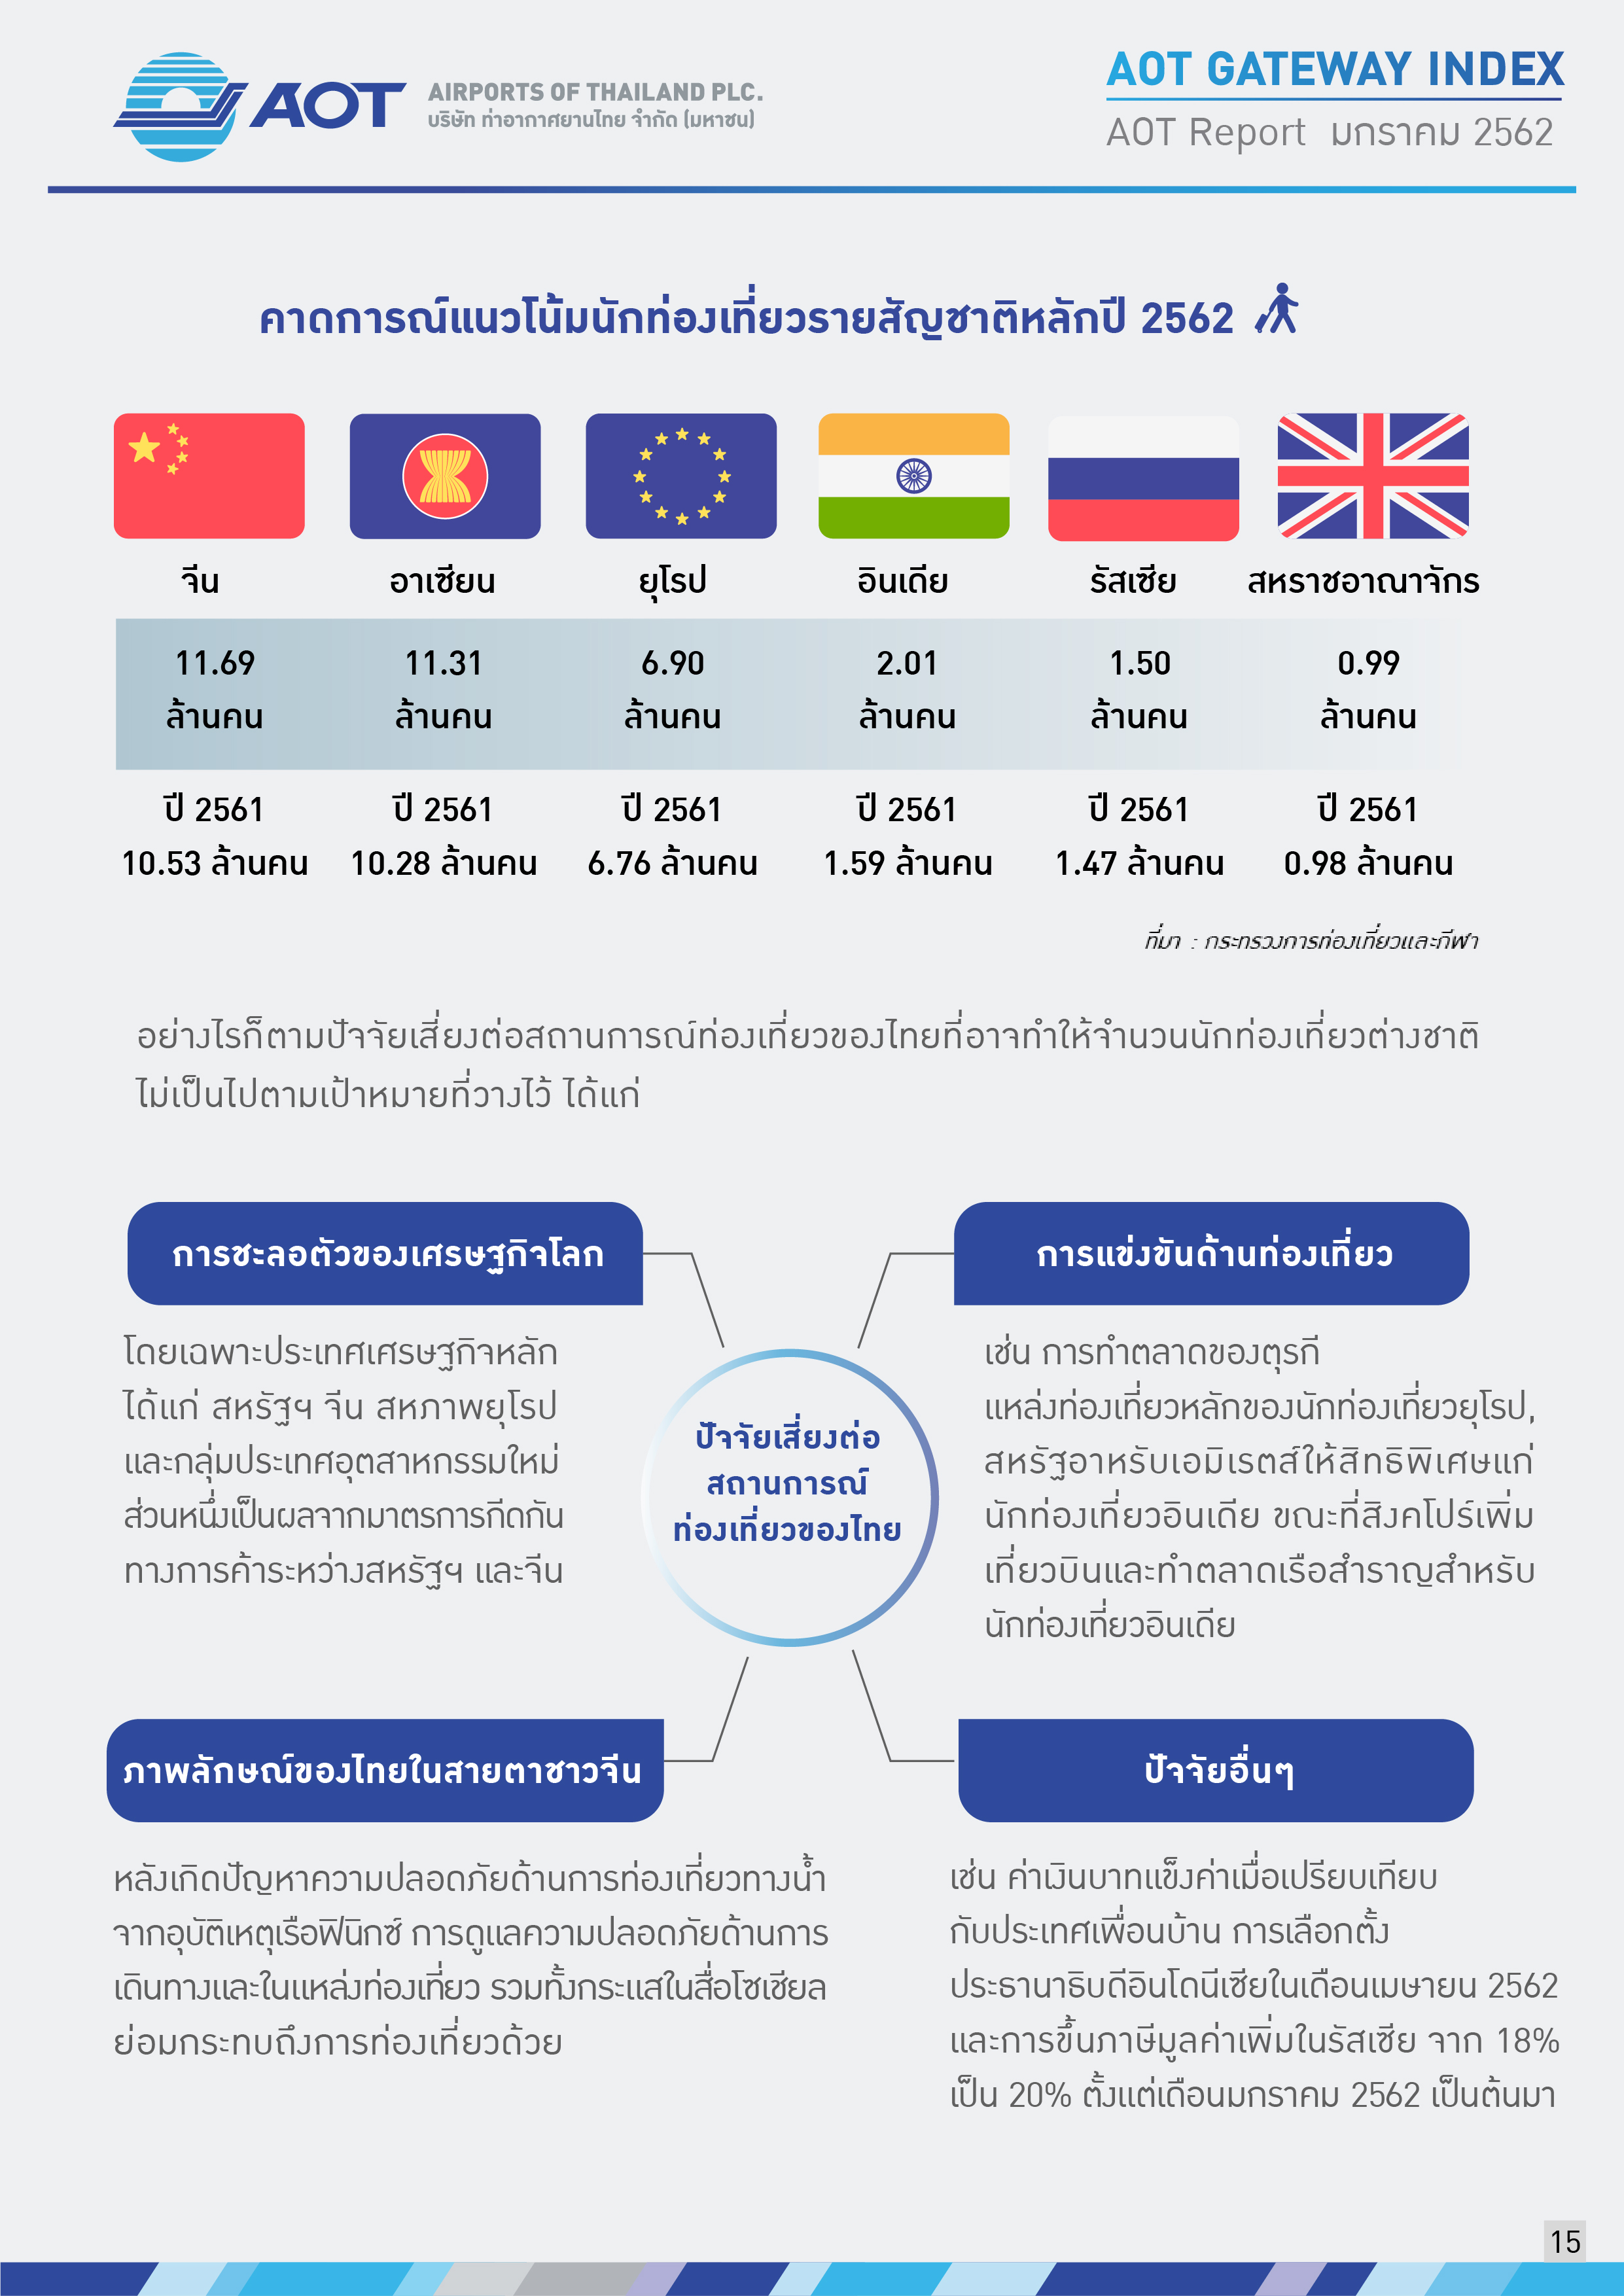 AOTcontent2019_Index_02_เศรษฐกิจโลก_V5_20190401_Page15